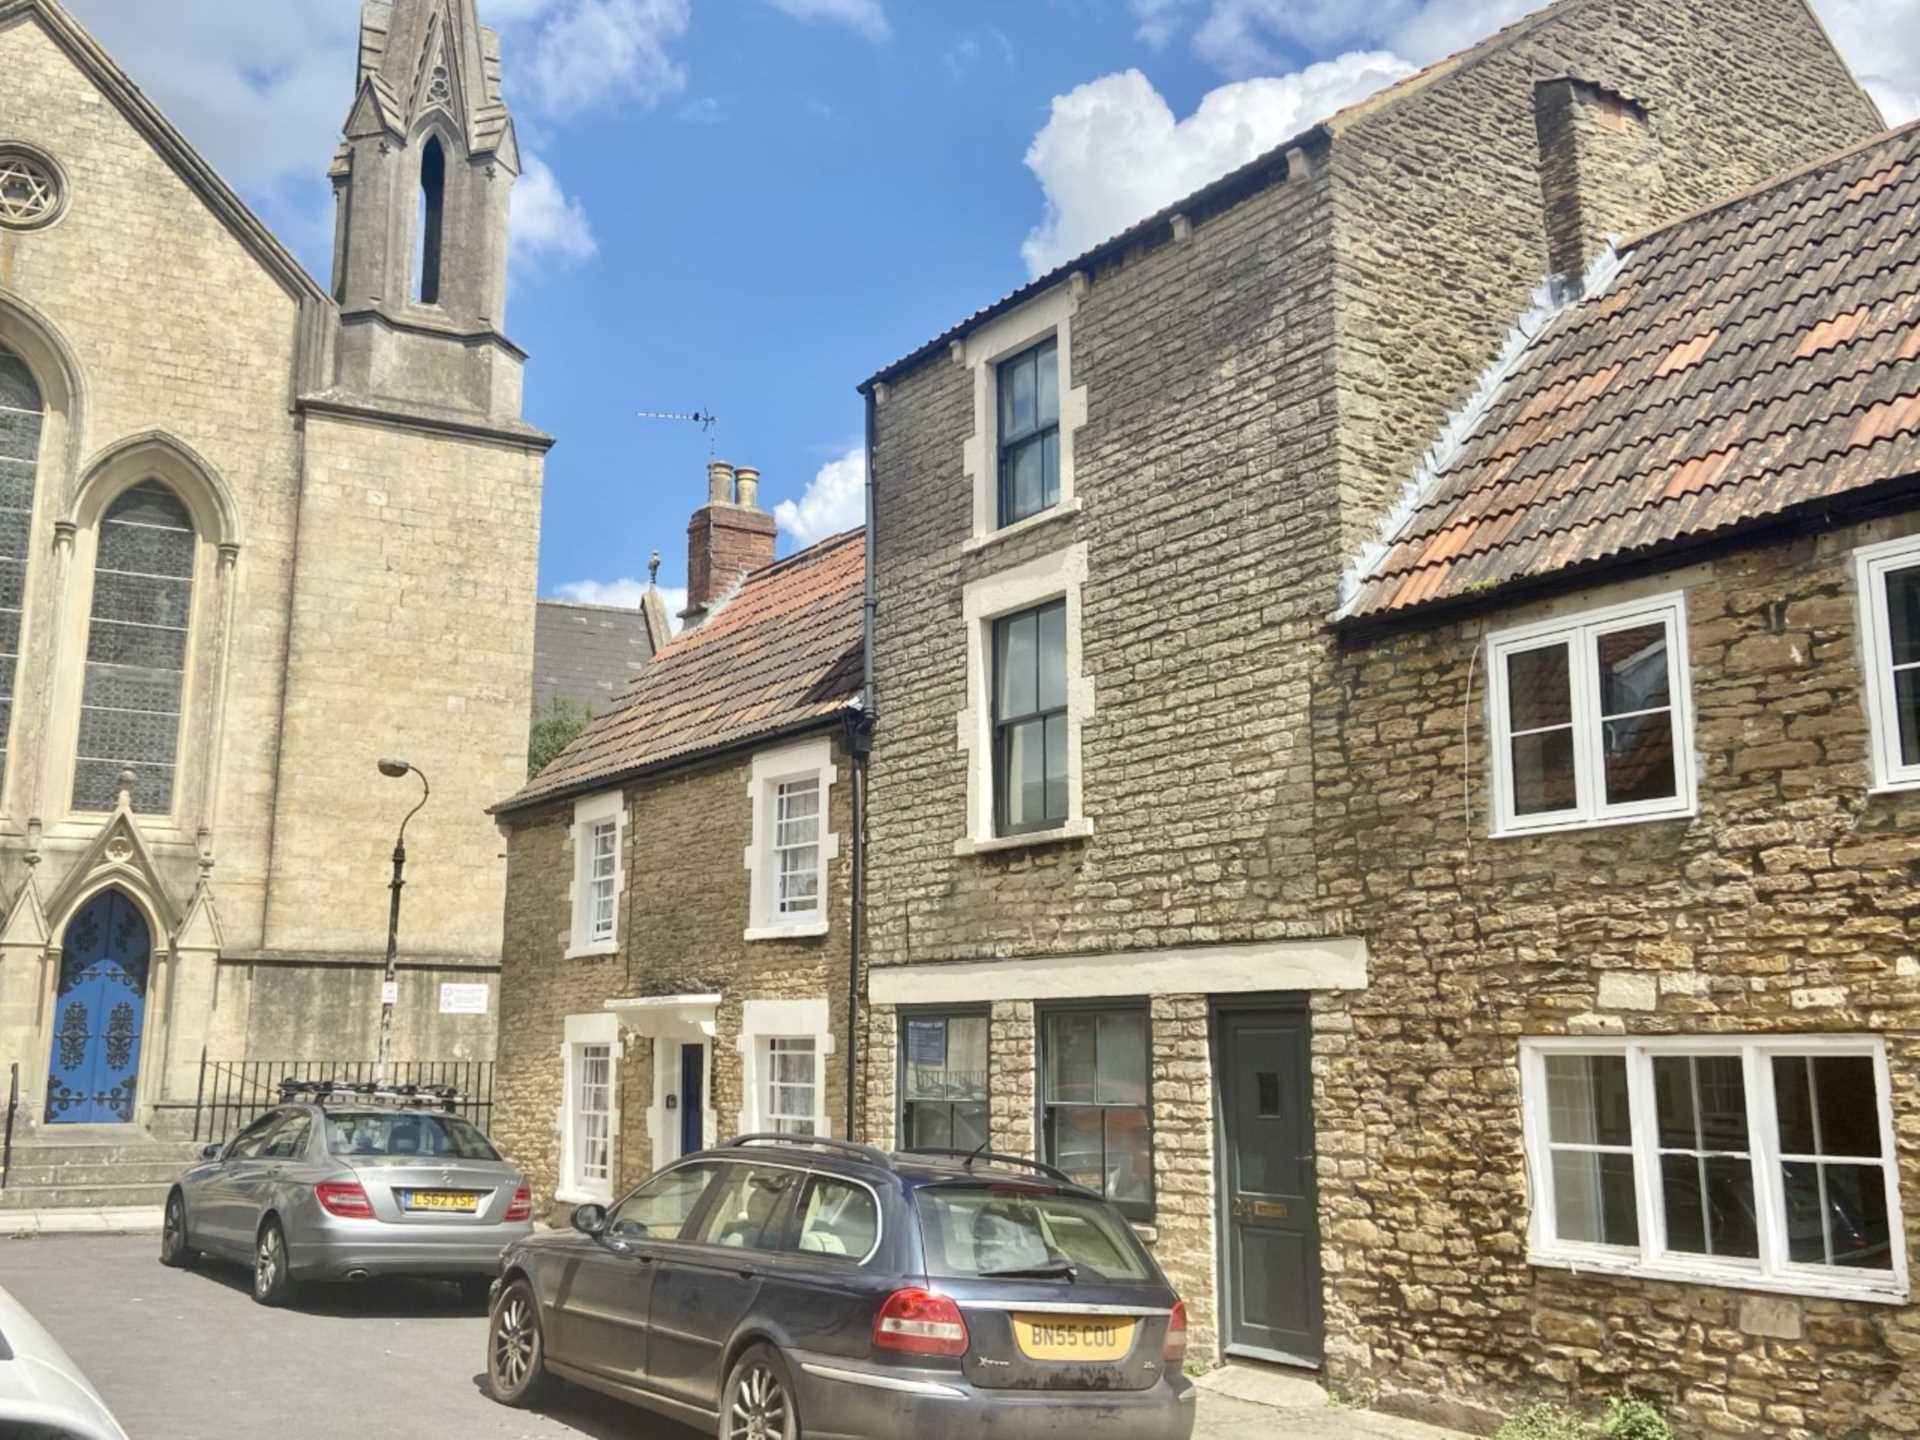 Swallows Property Letting - 4 Bedroom Terrace, Tinity Street, Frome